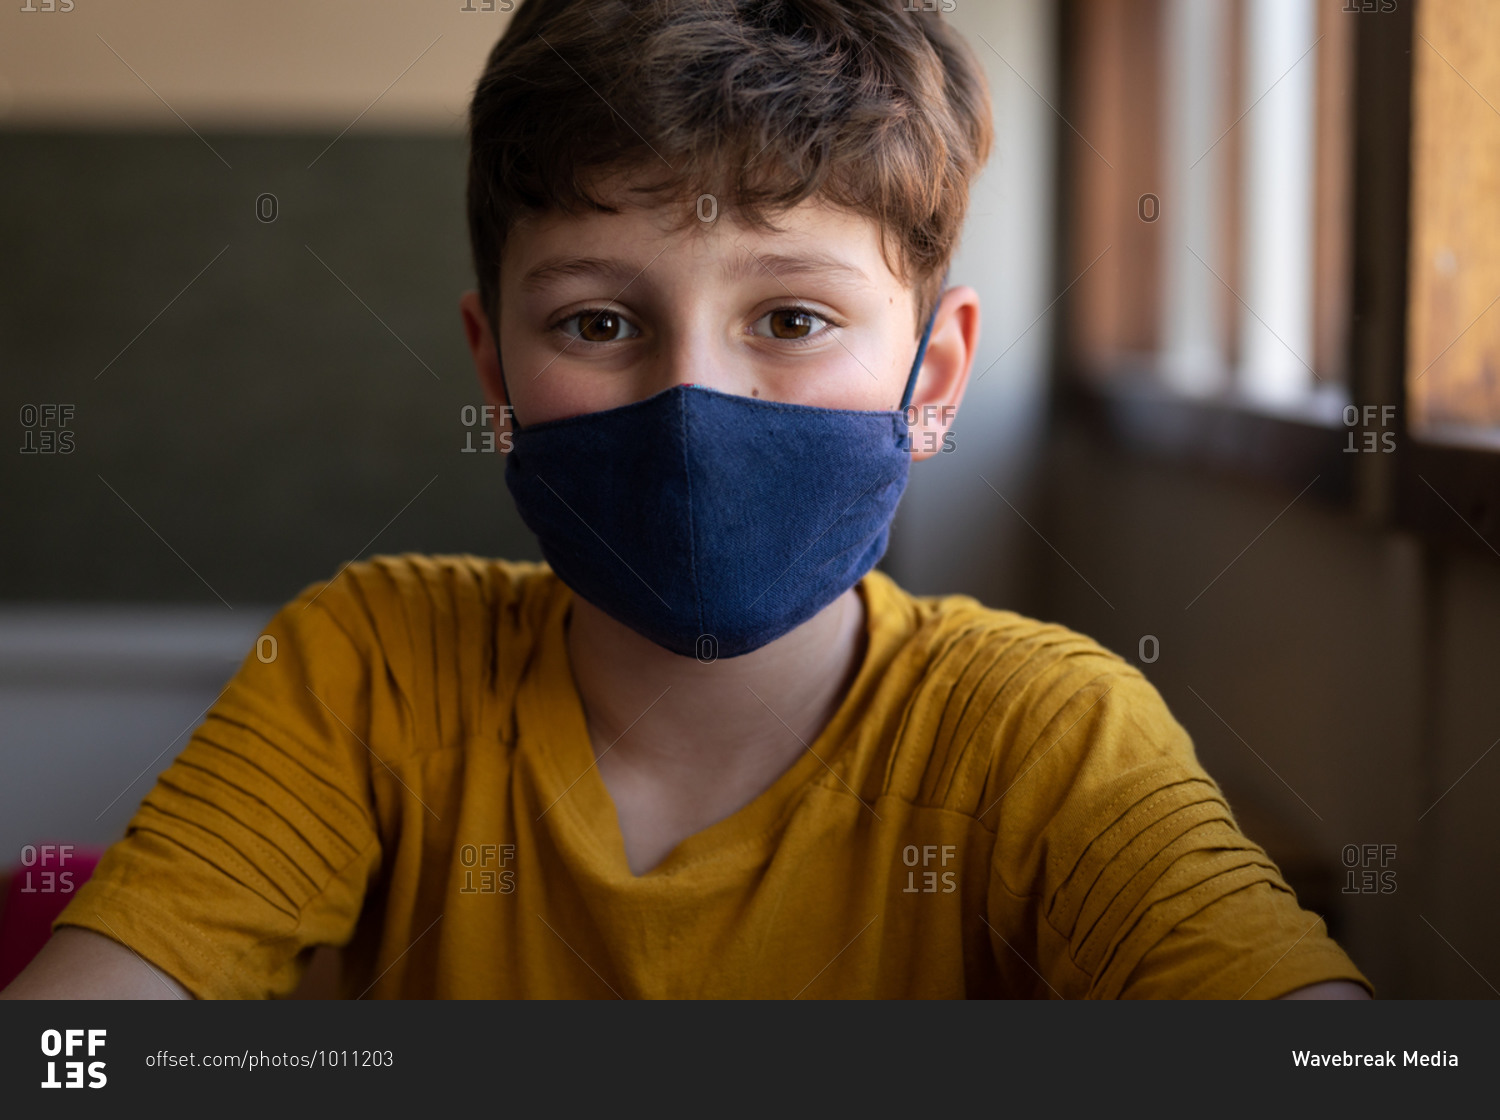 Portrait of a Caucasian boy sitting at desk wearing face mask in classroom. Primary education social distancing health safety during Covid19 Coronavirus pandemic.